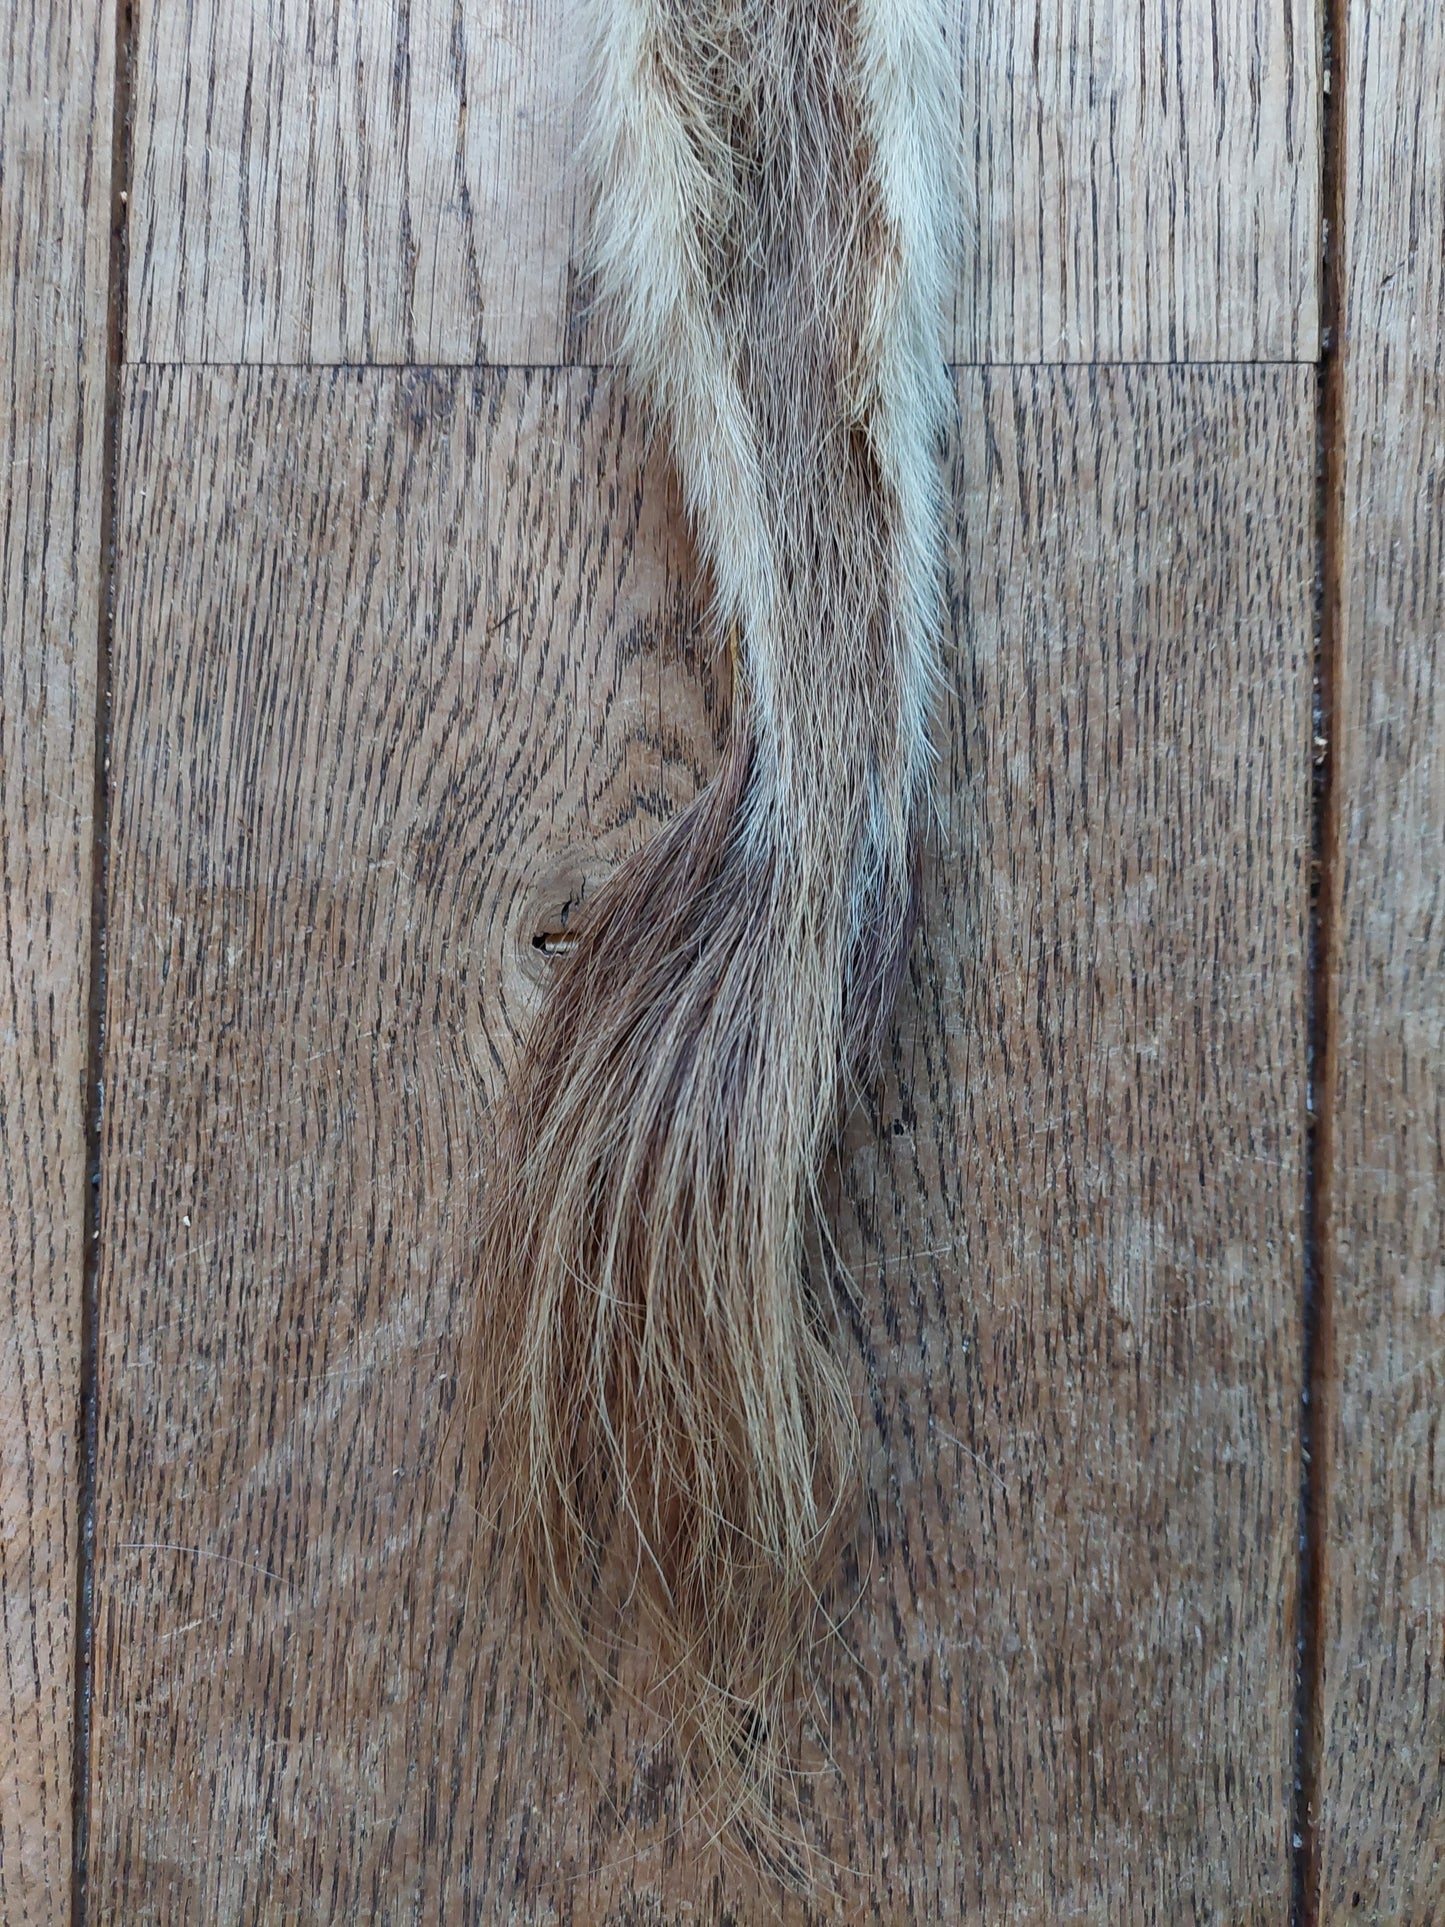 White-tailed deer tail